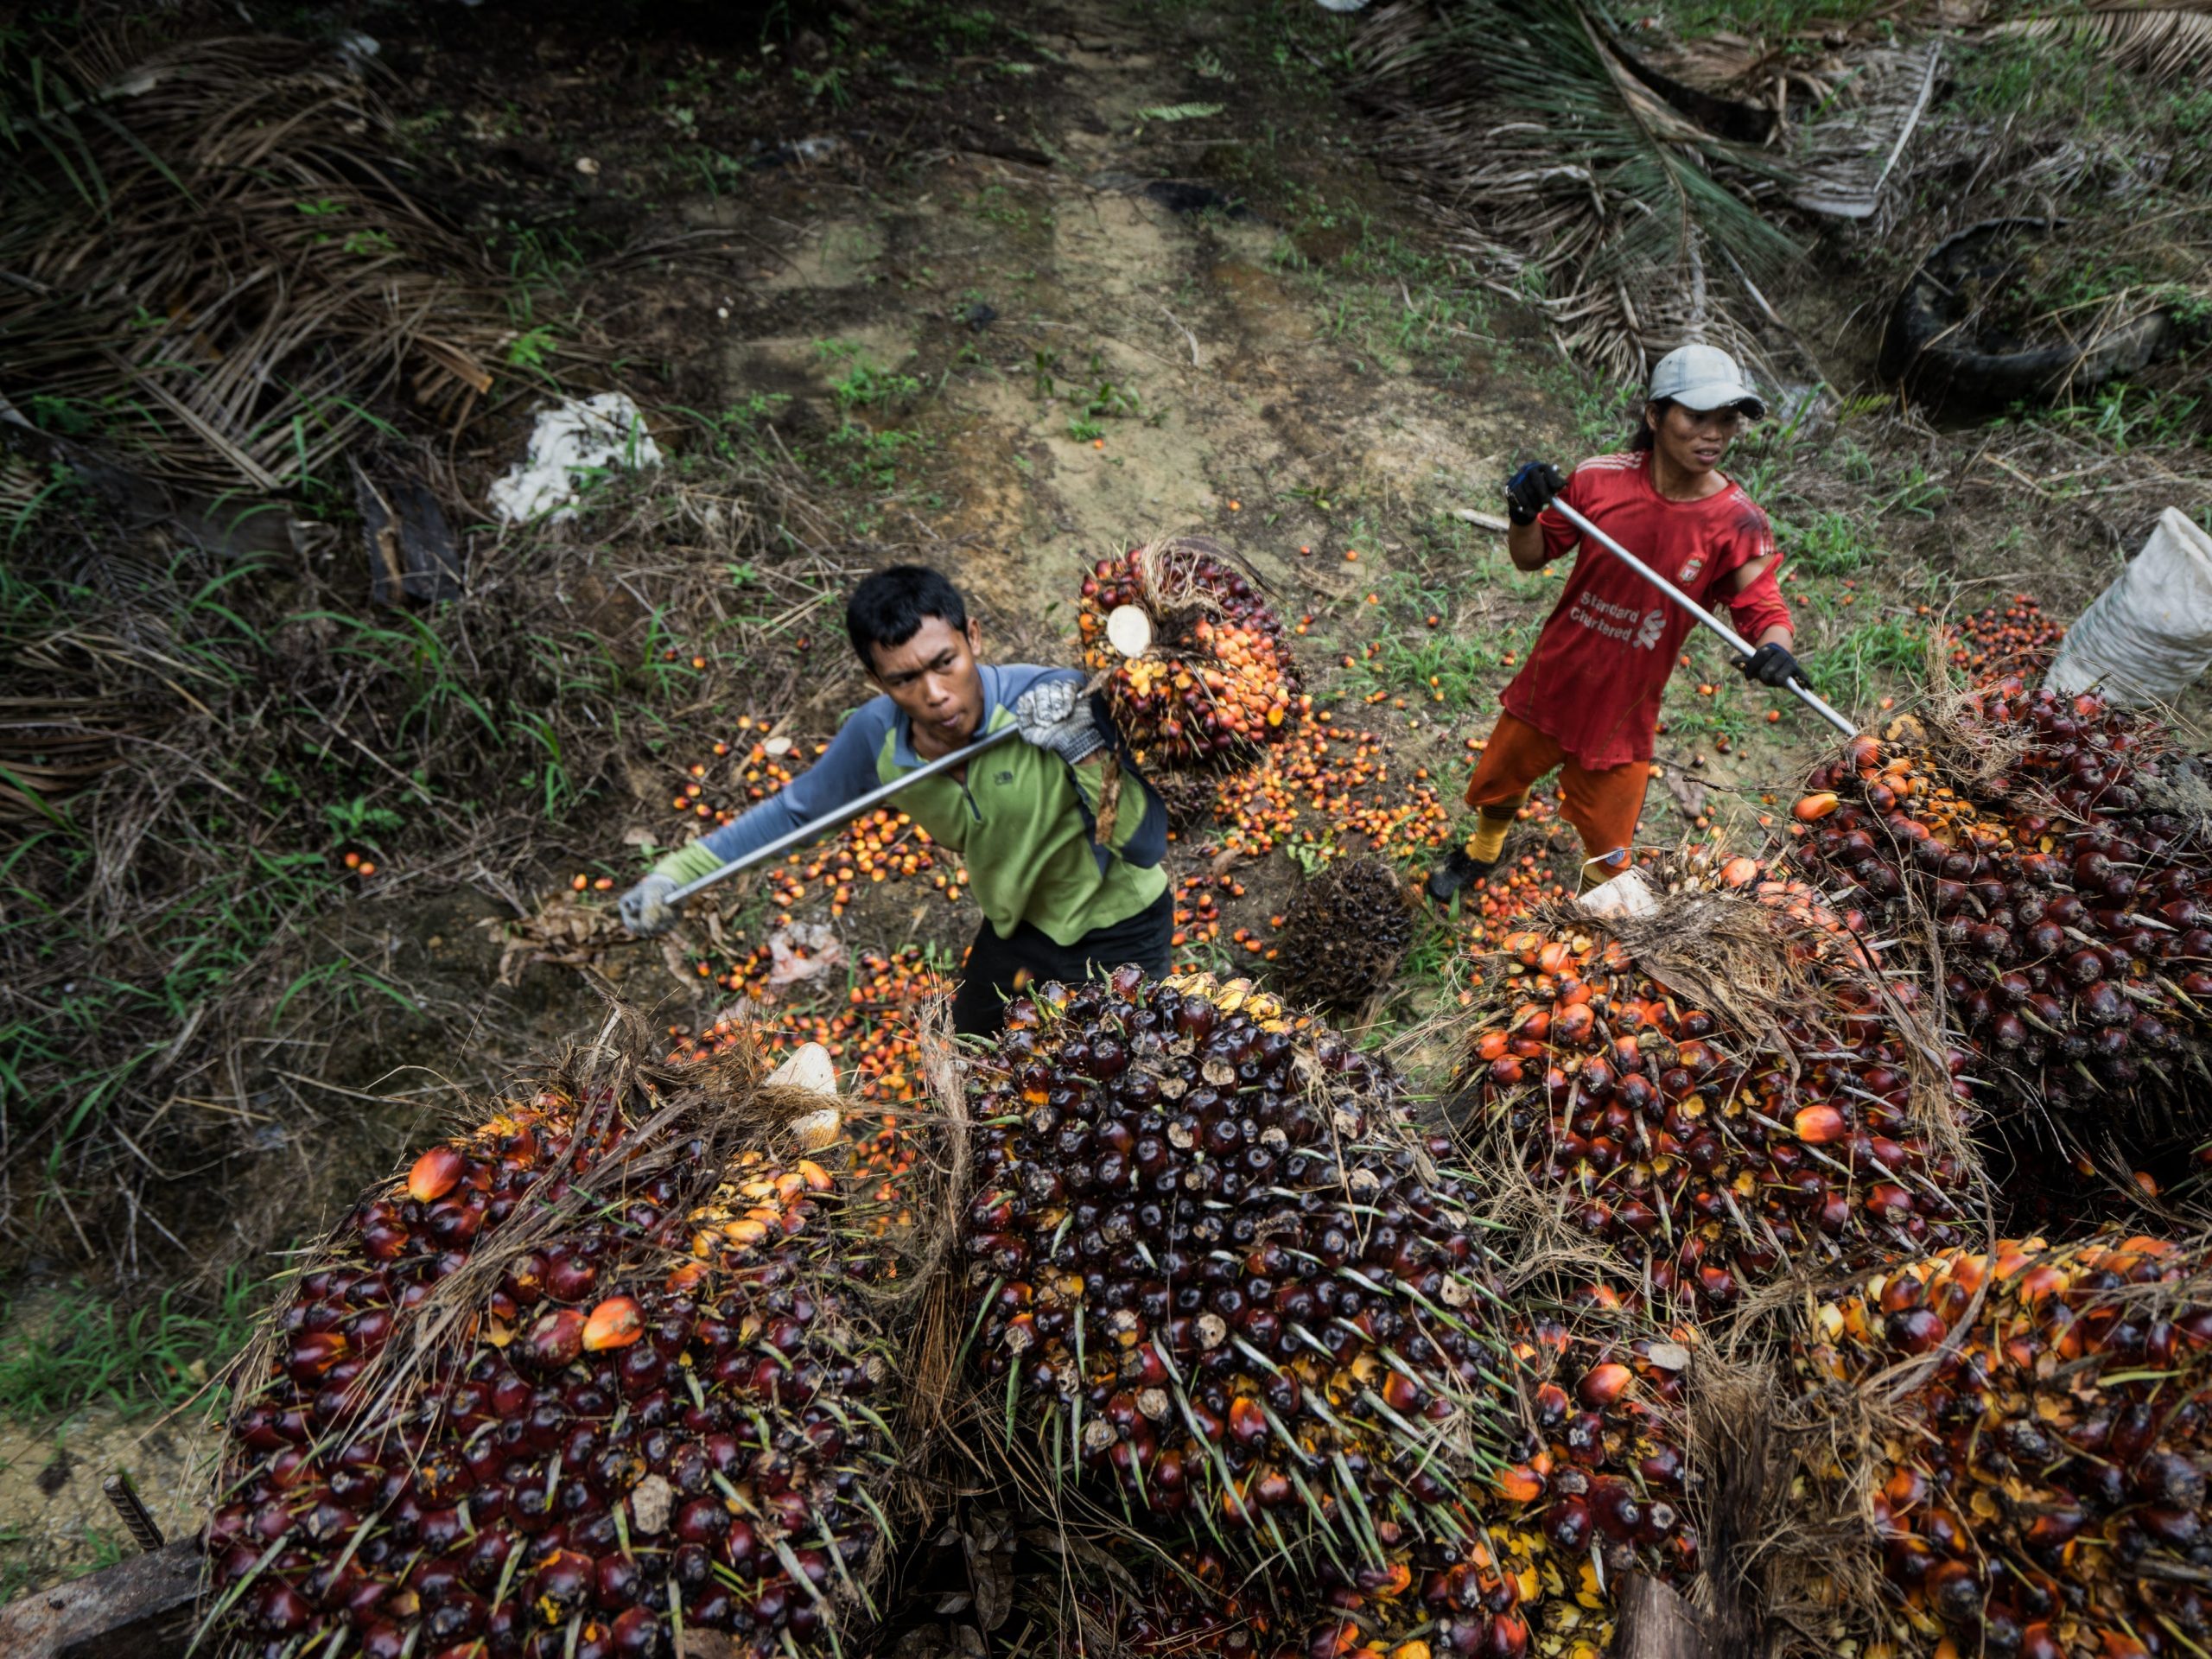 Workers harvesting oil palm fruits in Malaysia.